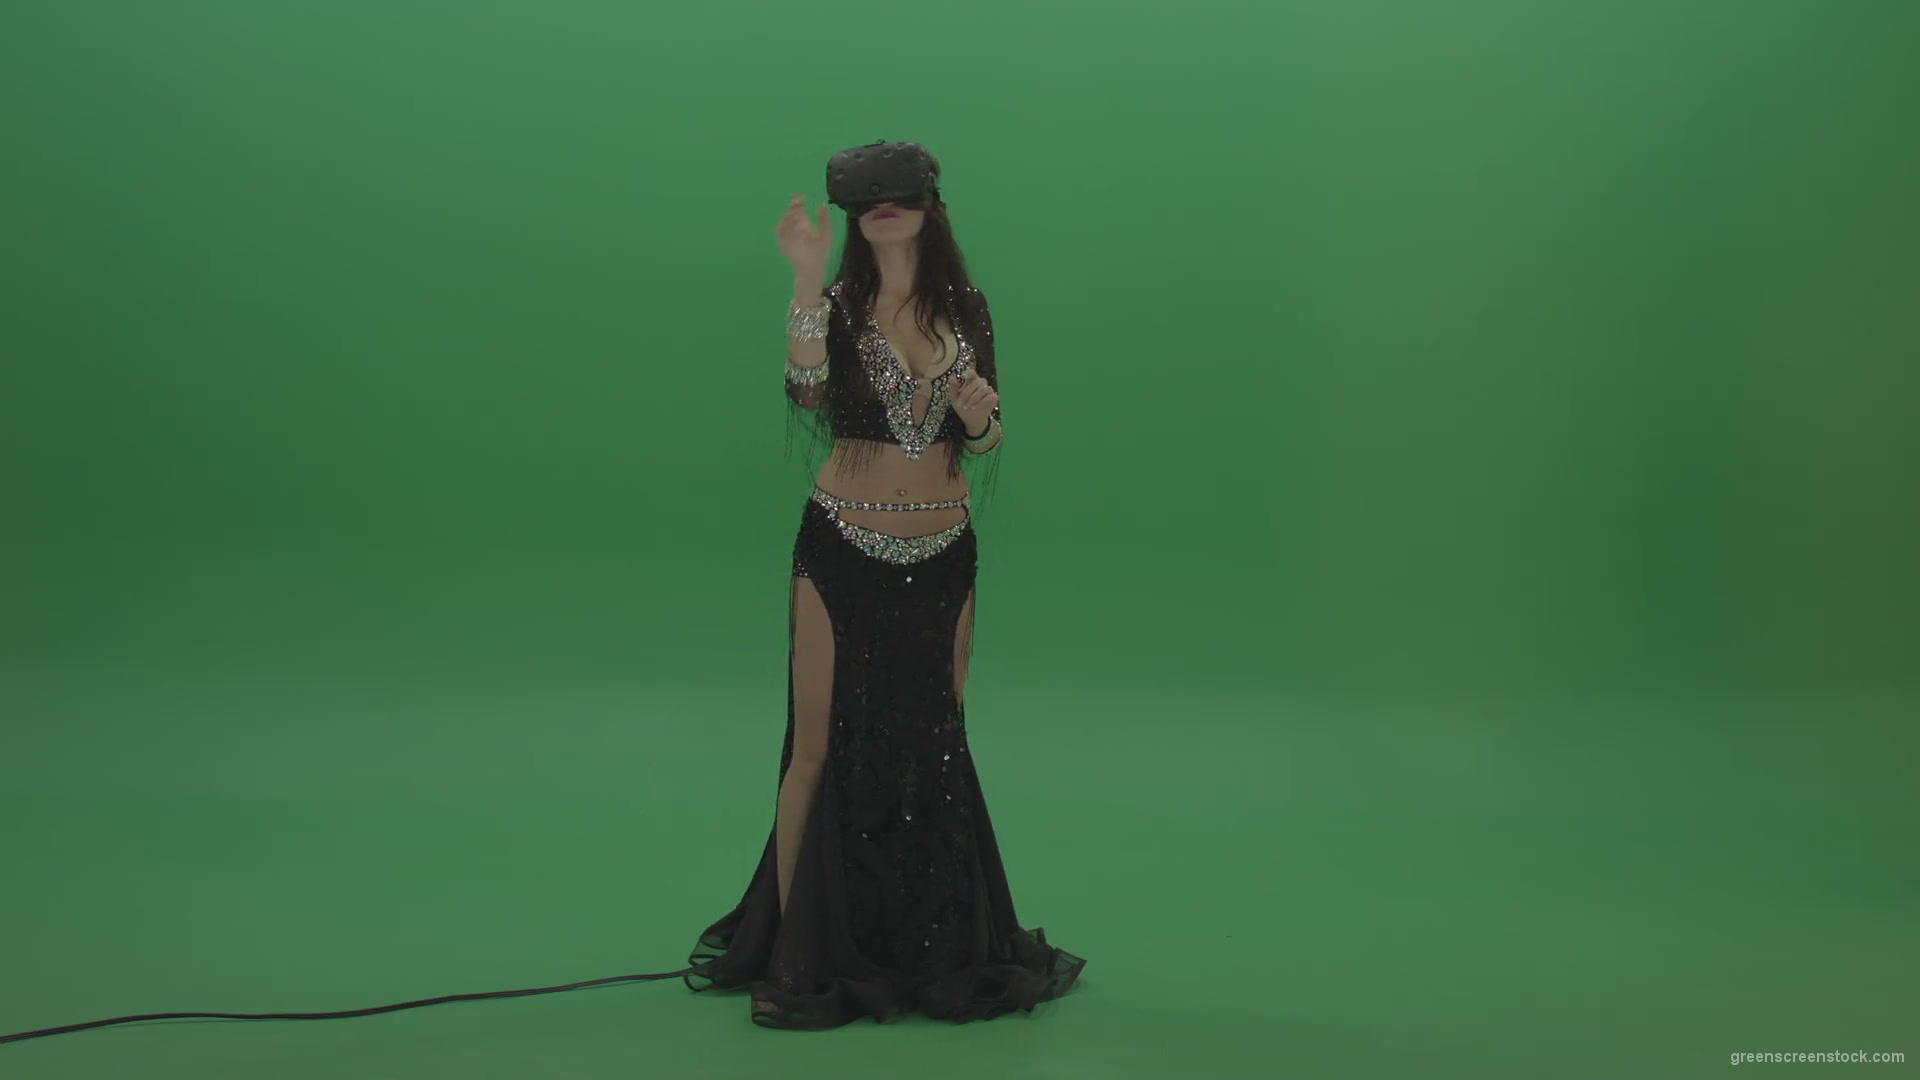 Beautiful-belly-dancer-in-VR-headset-operates-invisible-screen-over-green-screen-background-1920_009 Green Screen Stock